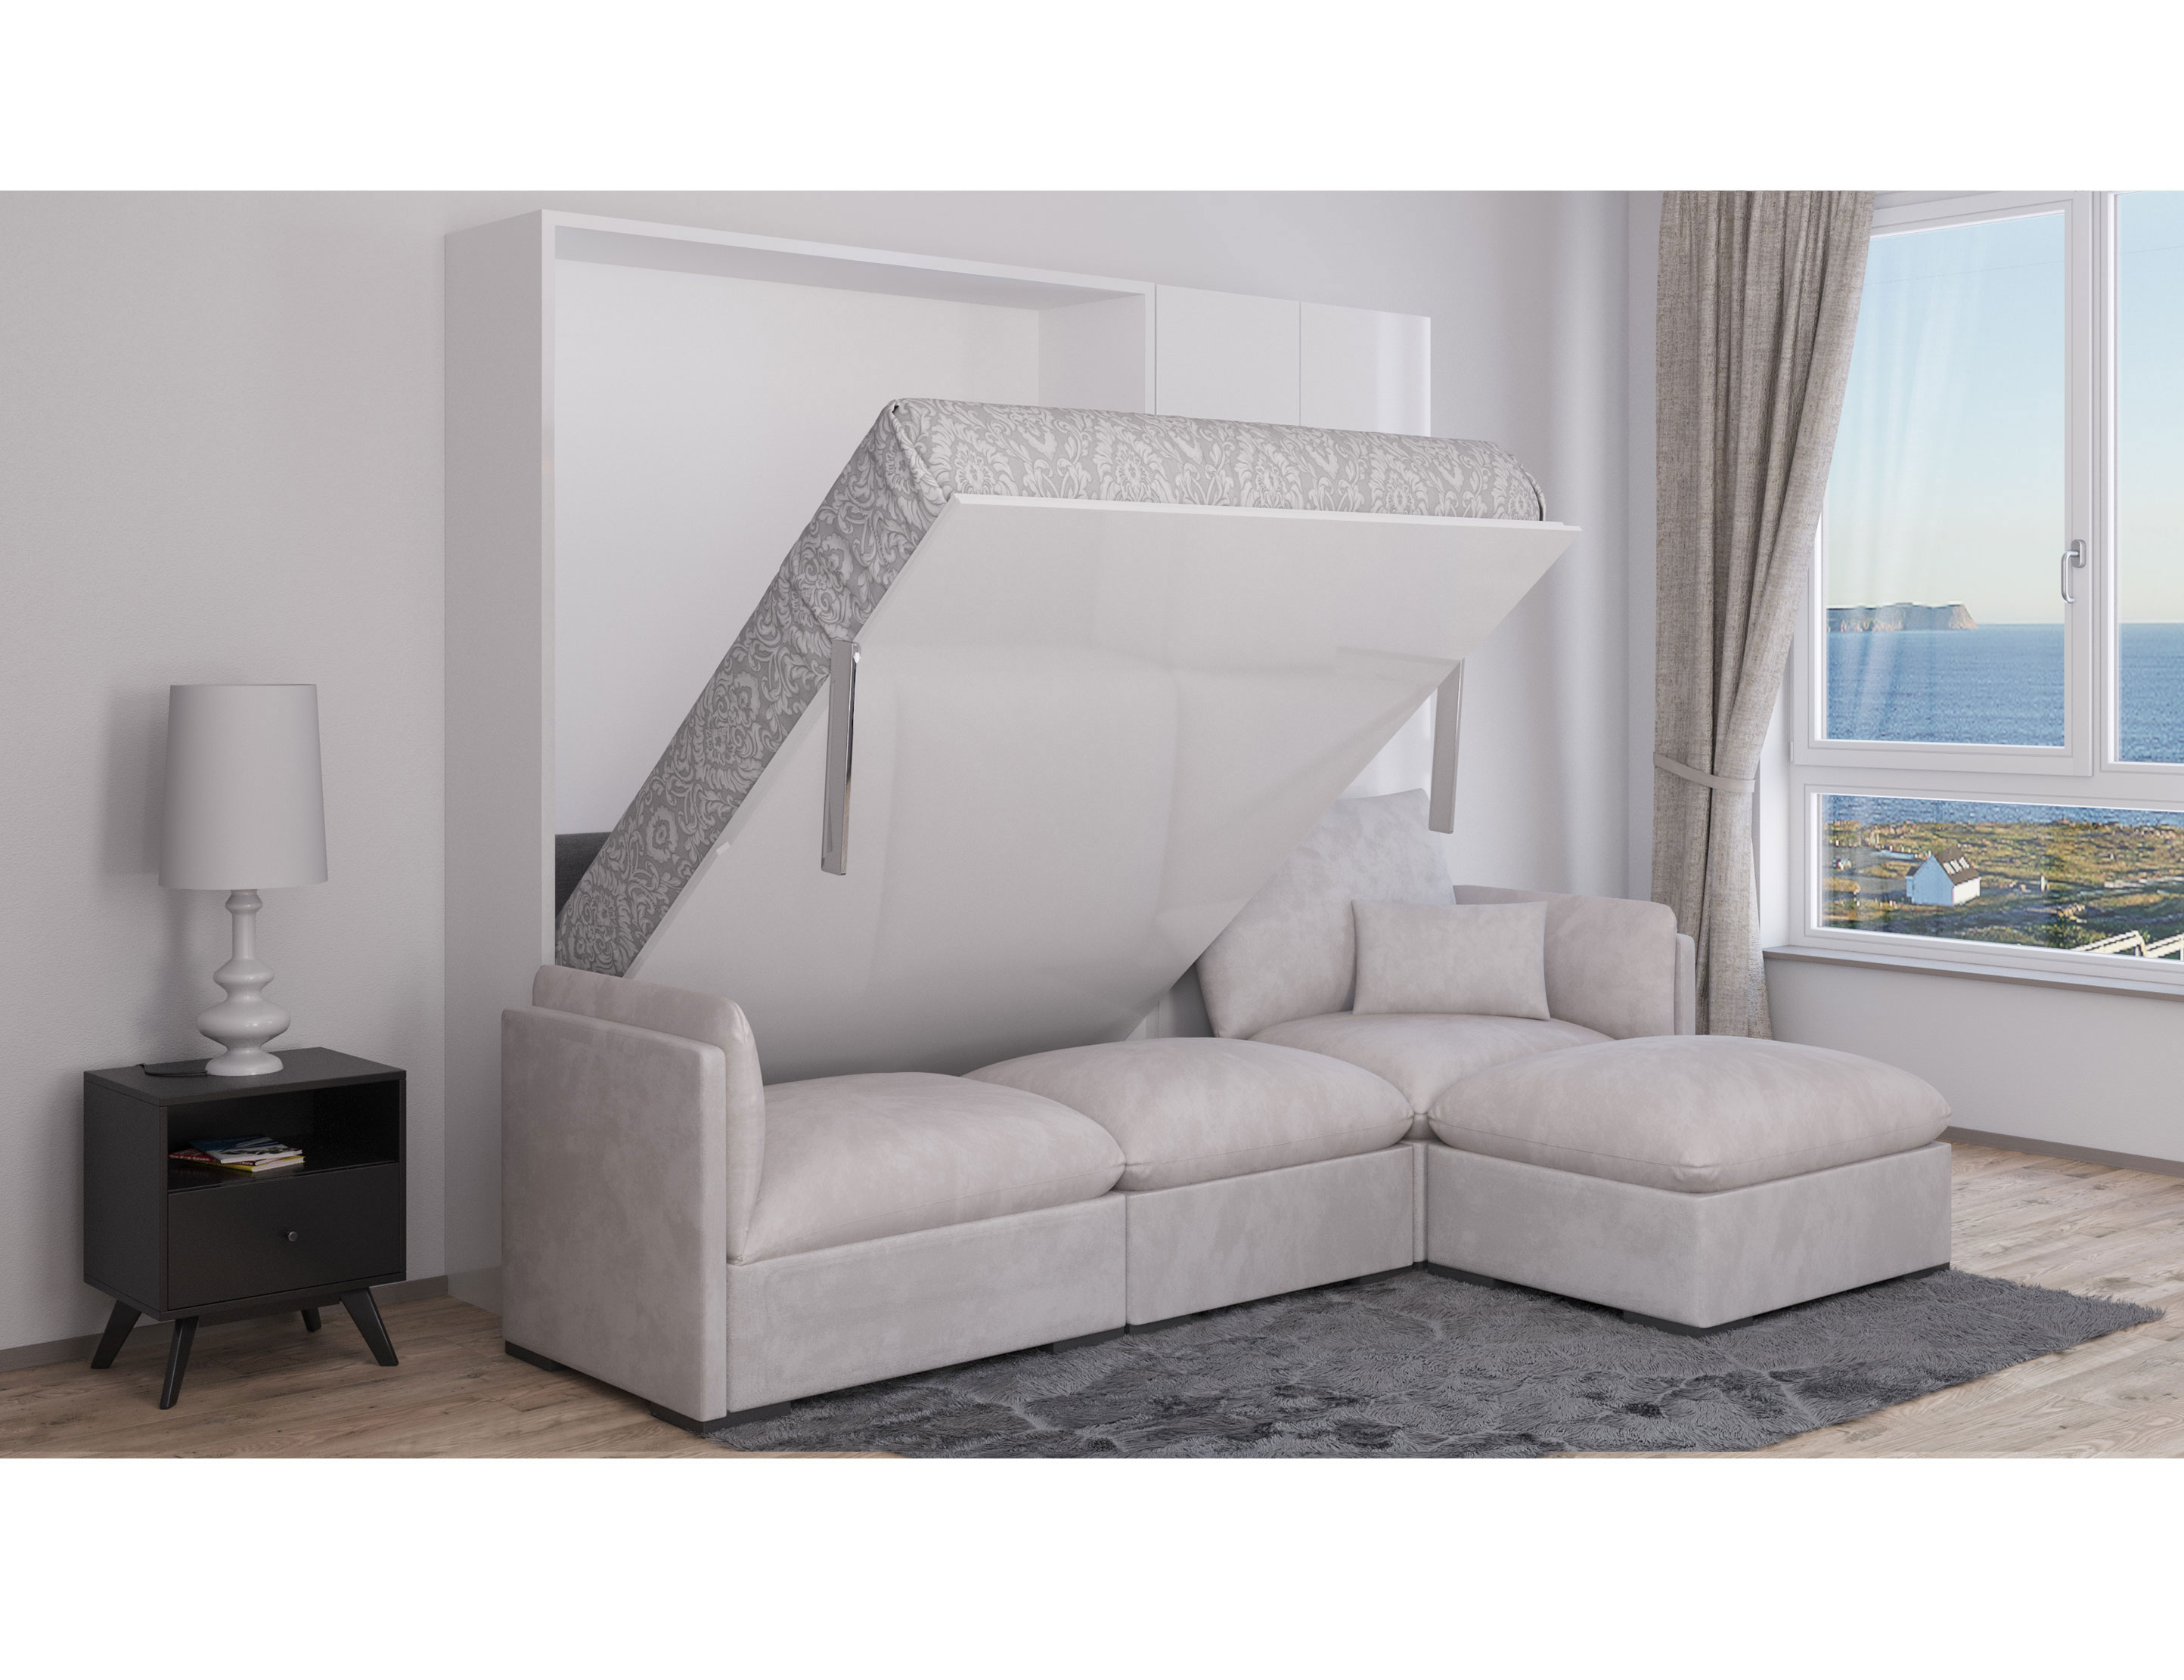 Queen Luxury Sectional Sofa Wall Bed, Luxury Bed Sofa